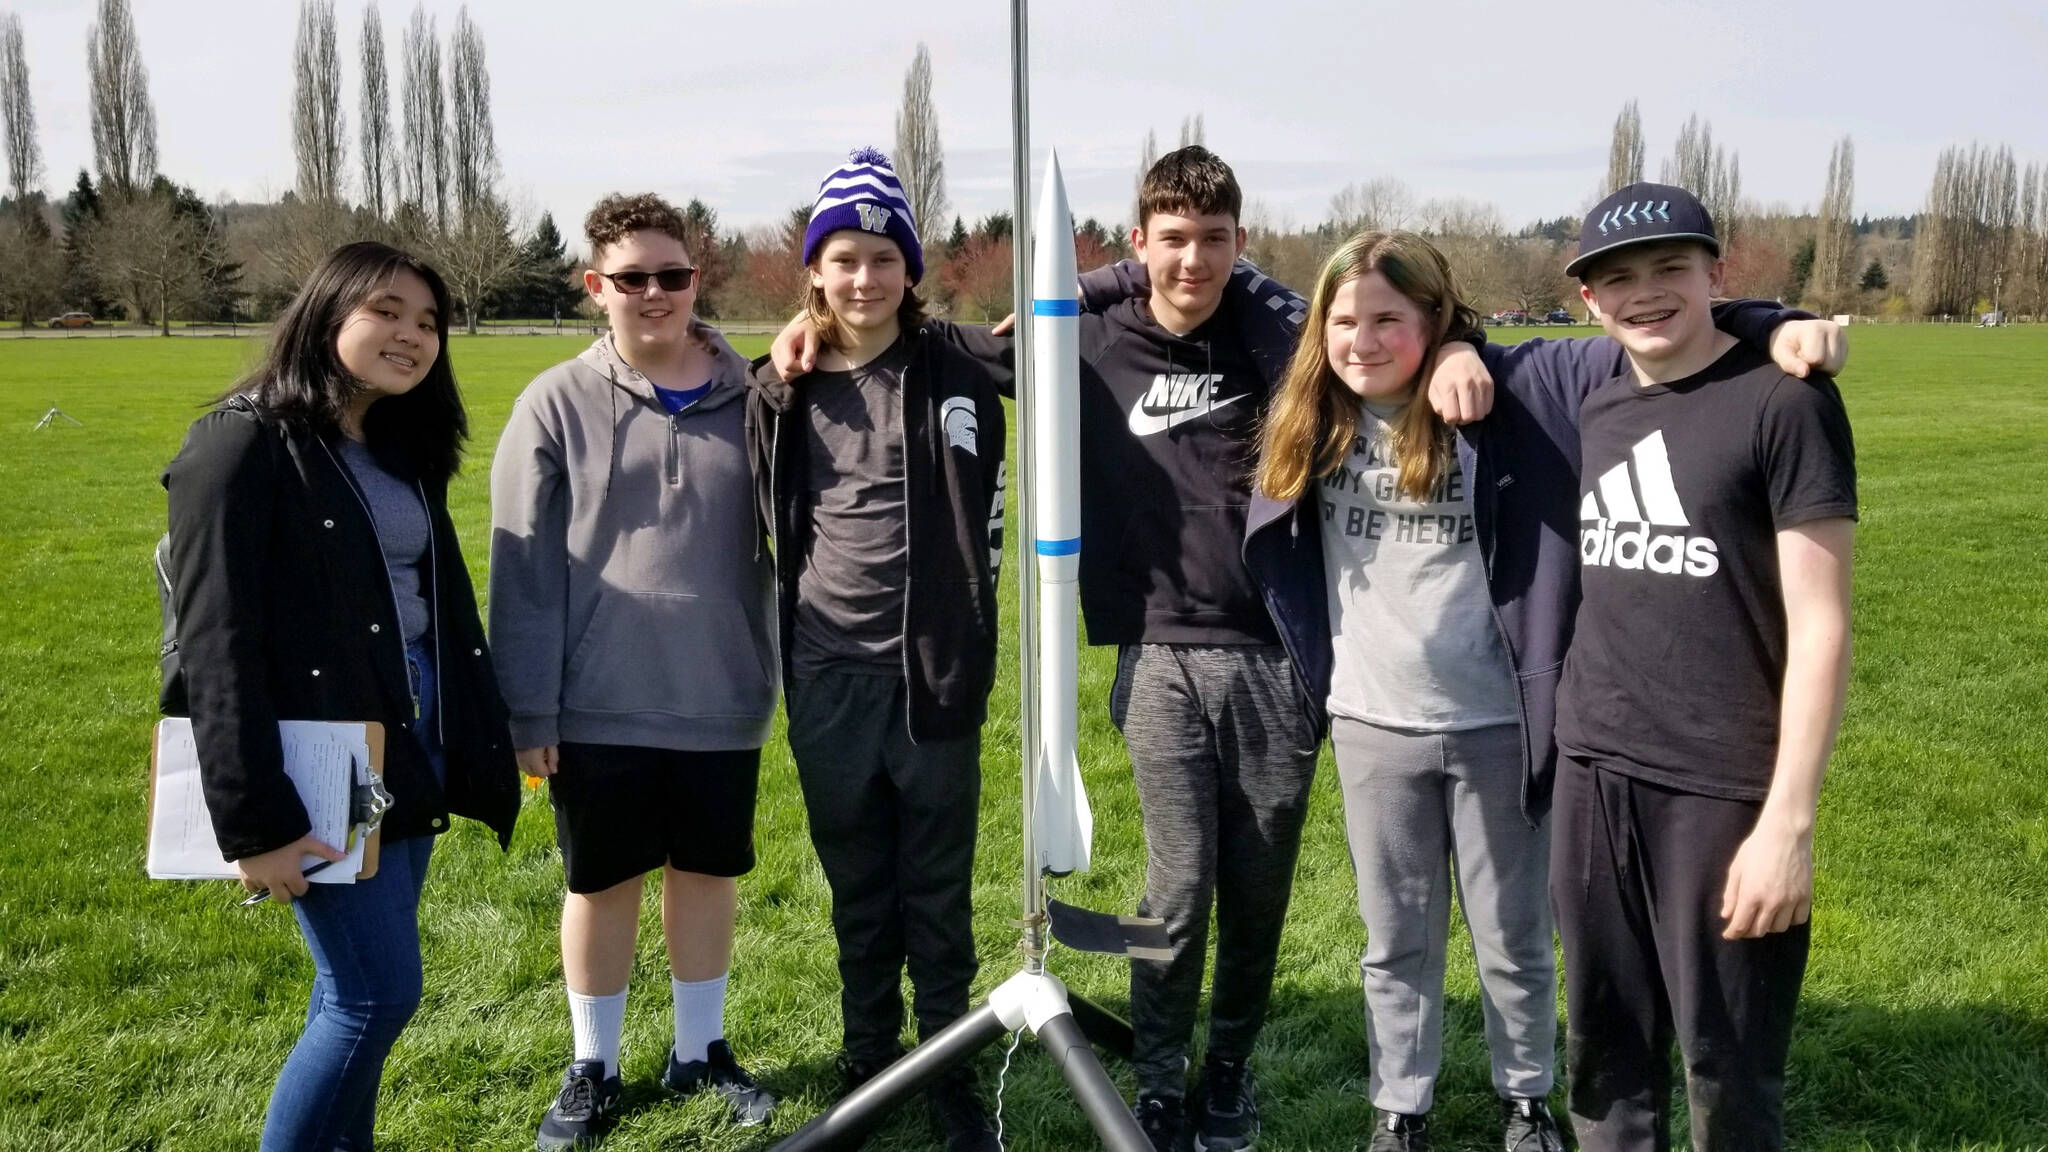 Photo courtesy of Marc Deaver
(Left to right) Cascade Middle Schoolers Melinda Mai, Jordan Englert, Dawson Delaney, Mason Coates, Liam Jones and CJ Baxter pose for a photo next to the rocket they designed and built for the American Rocketry Challenge.